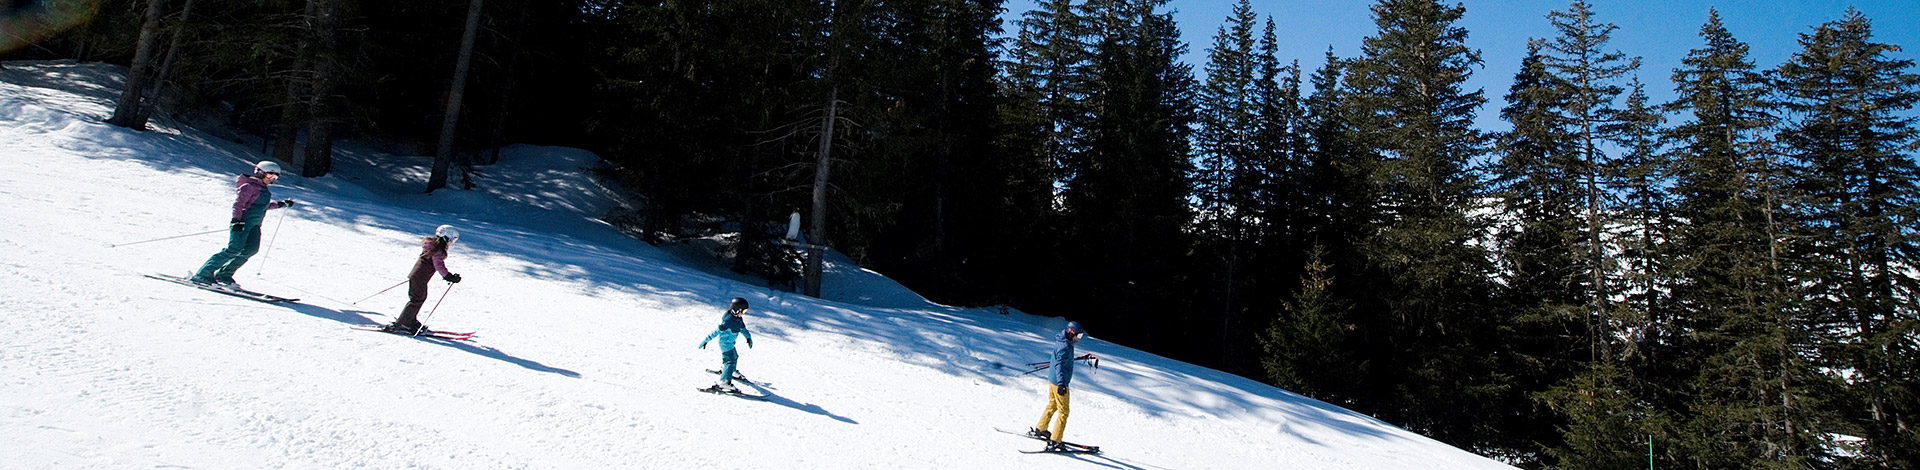 Ski with family in the middle of the Altiport forest in Méribel at the heart of Les 3 Vallées, ideal for skiing with whole family.